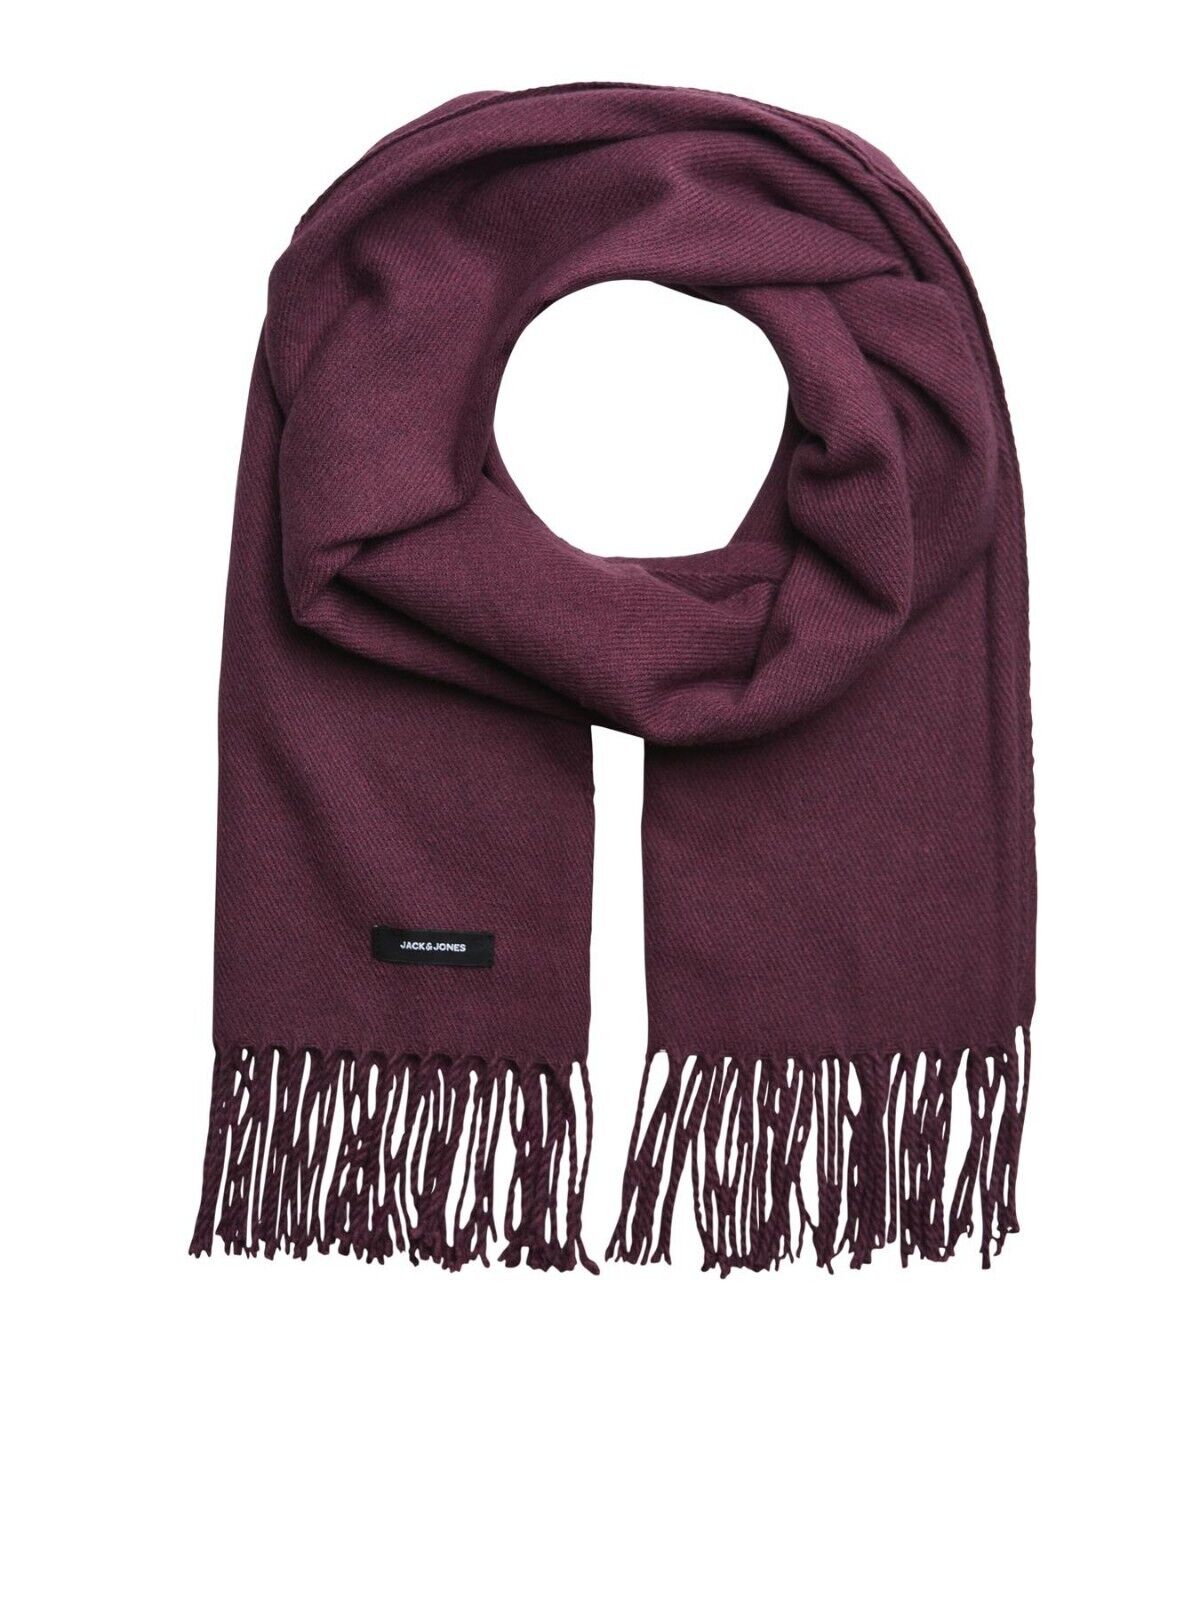 Jack & Jones 'Solid' Scarf in Red - VR2 Clothing